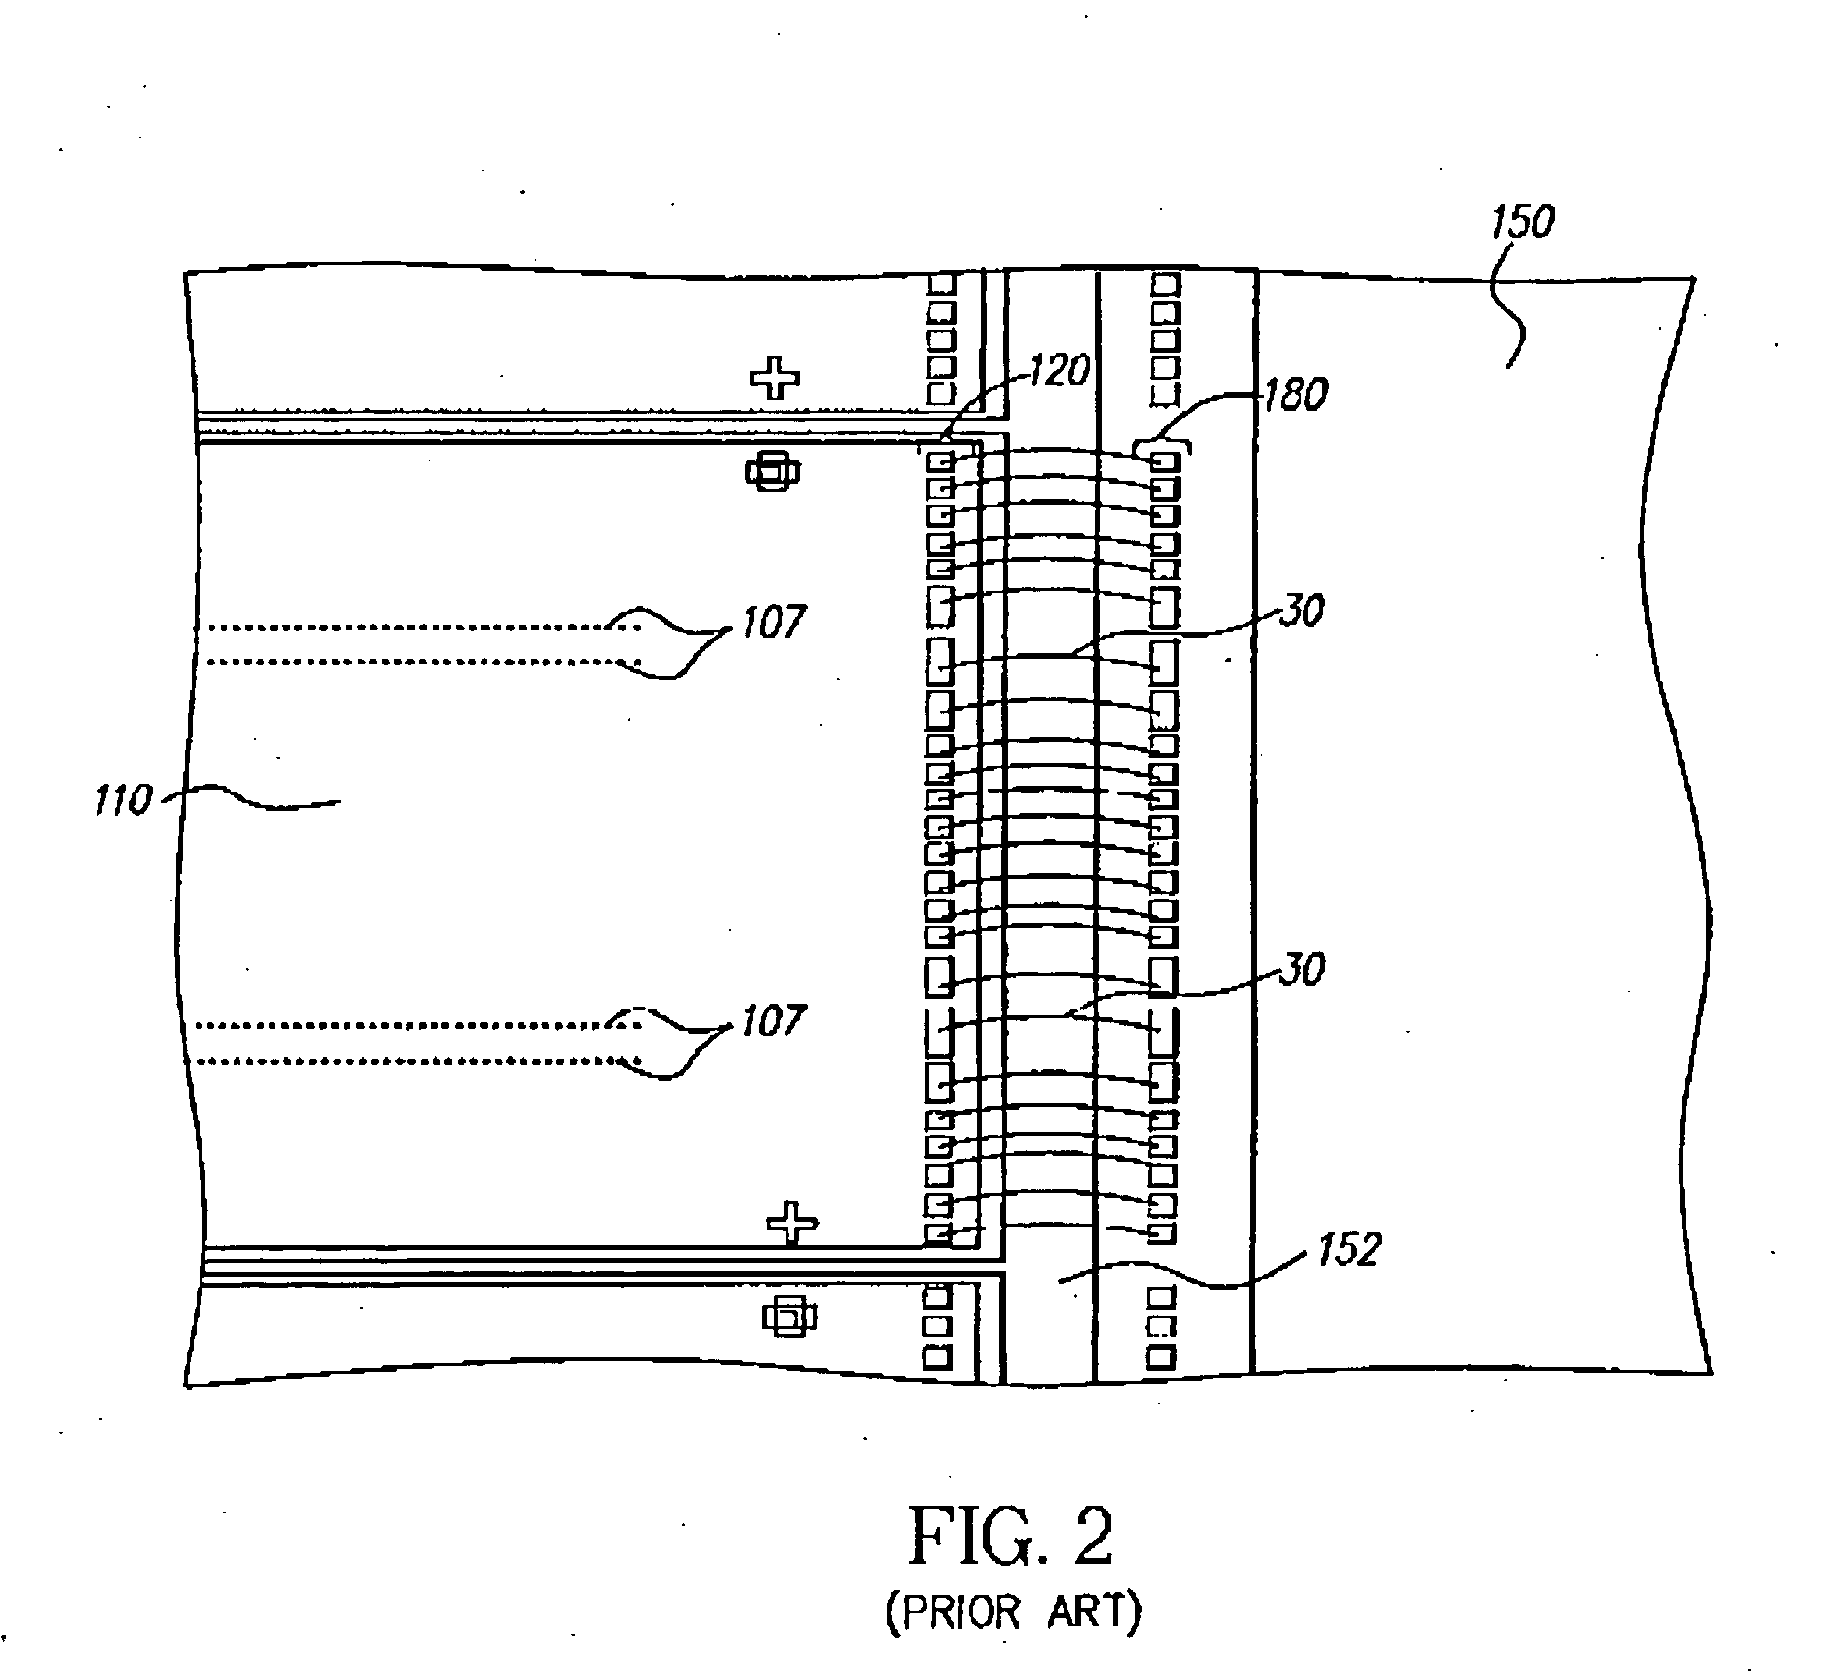 Fluid-ejecting device with simplified connectivity